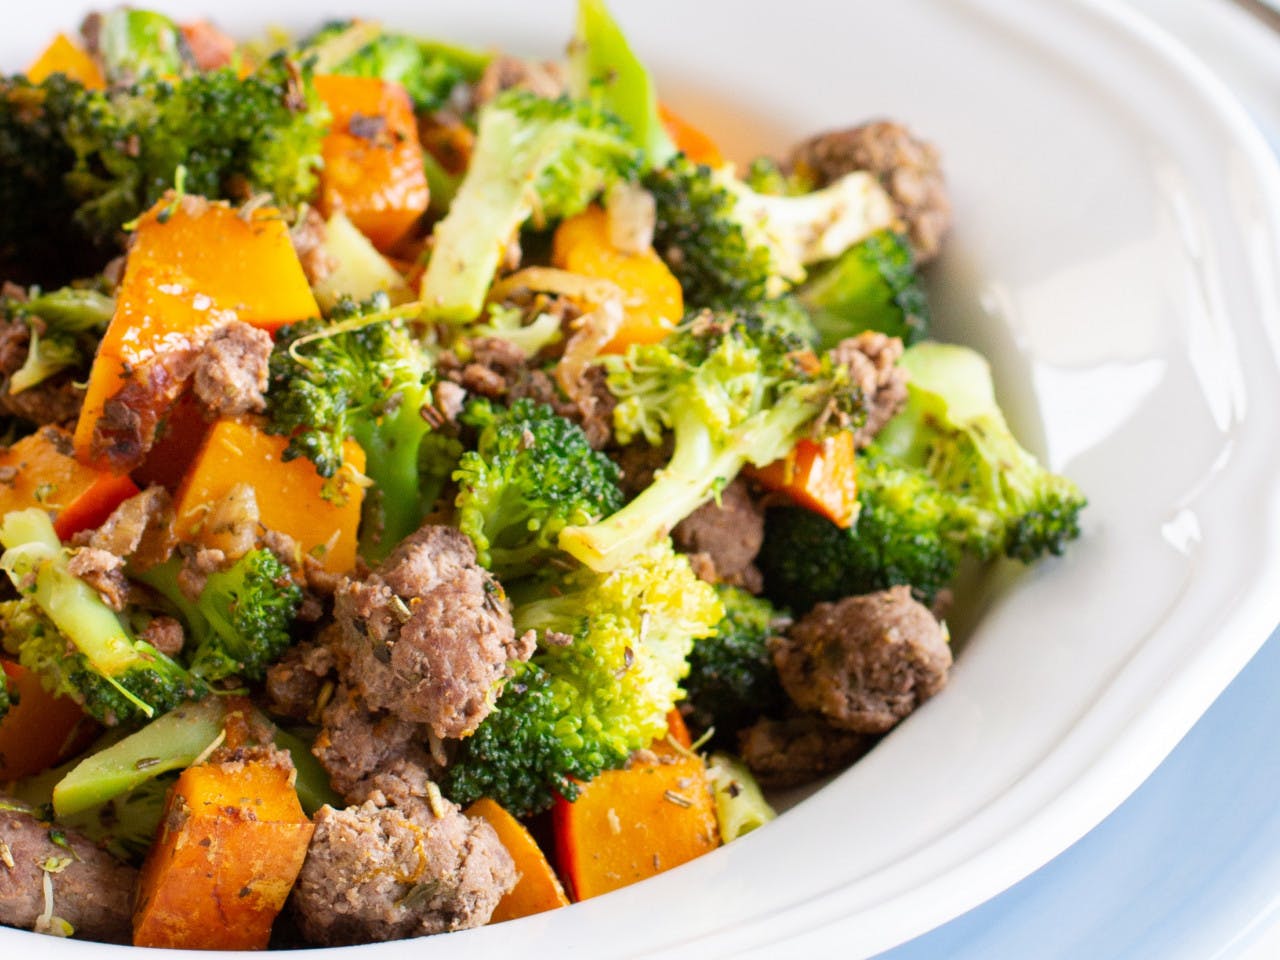 Ground beef with broccoli